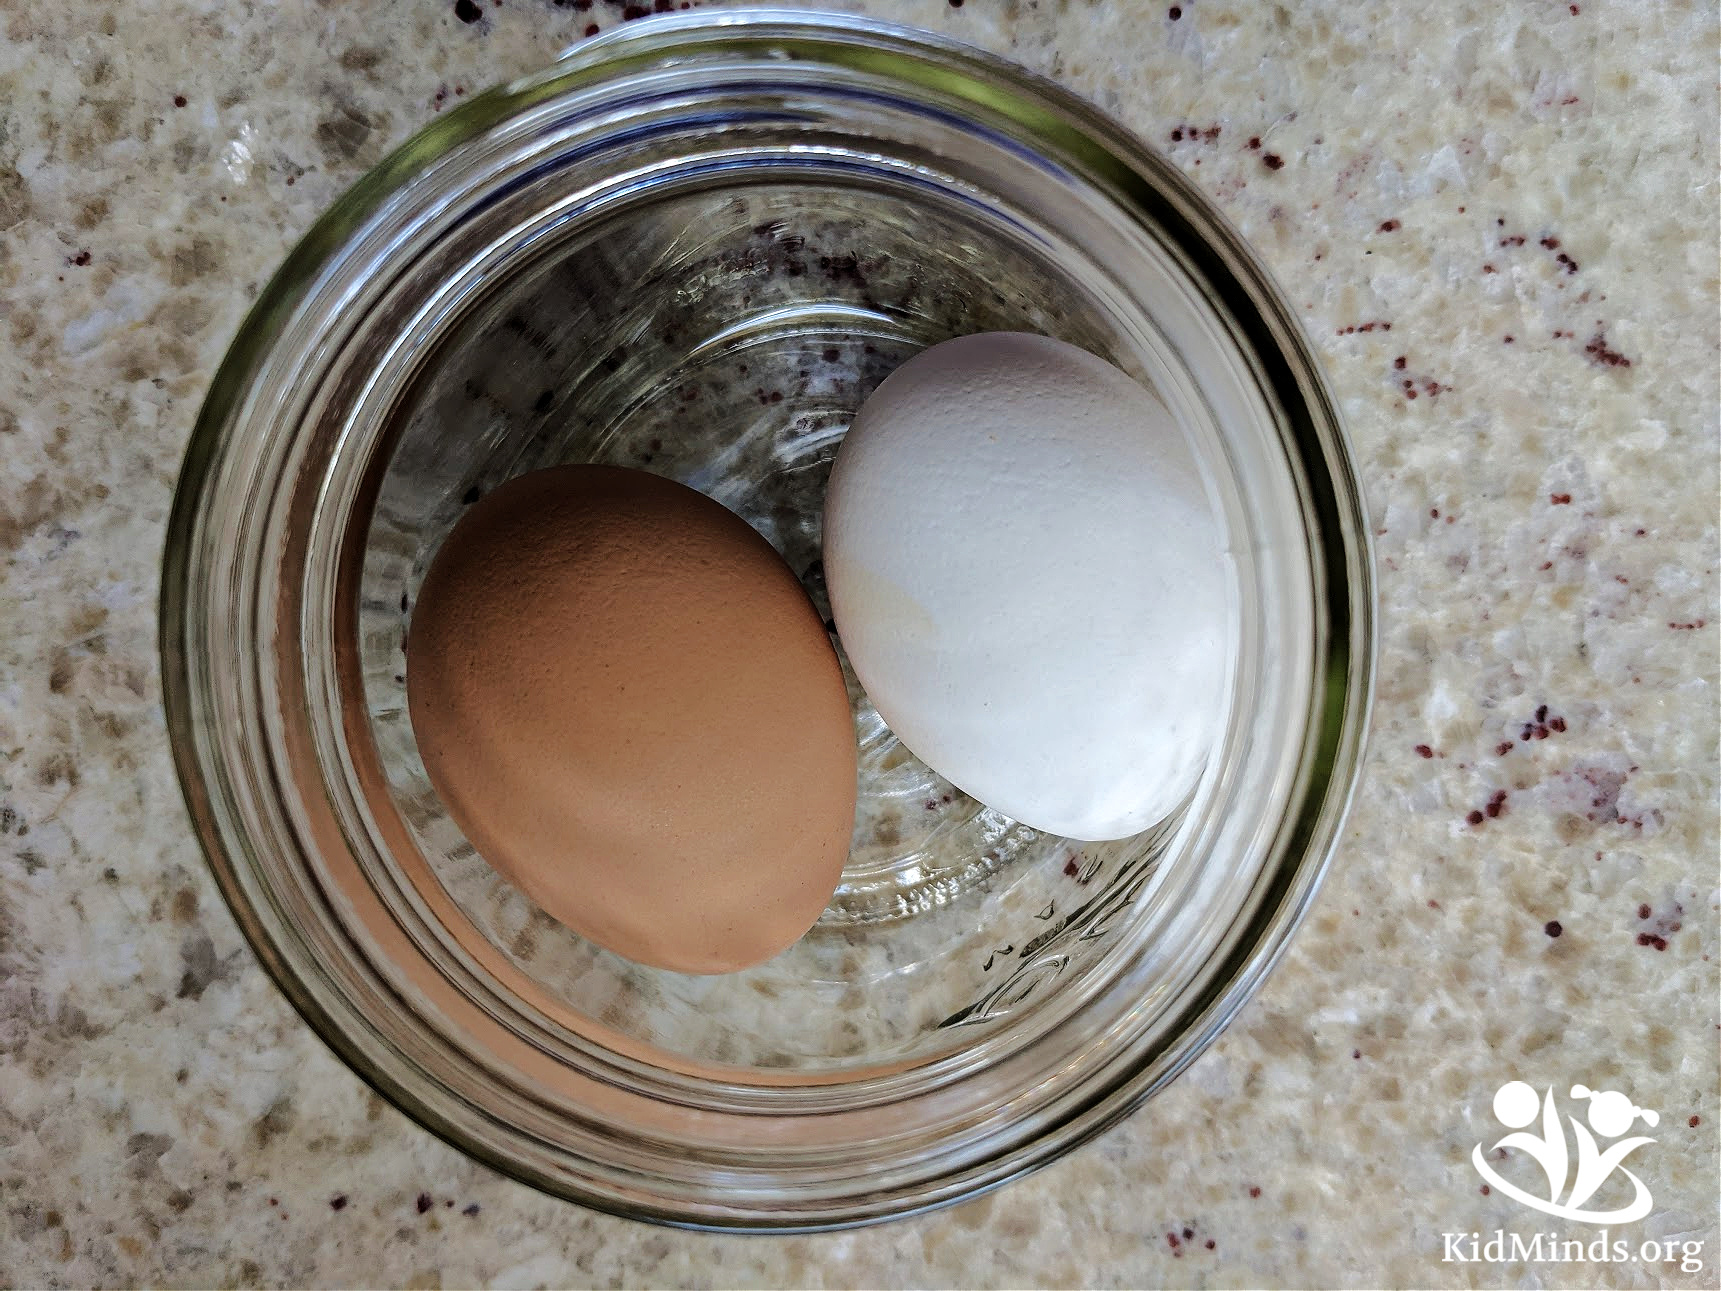 Whether you’re looking for an easy #science activity, a spring-themed #experiment, some kitchen science, a hands-on #egg exploration, or a kid-friendly introduction to #chemistry, this one is for you!  #handsonlearning #kidsactivities #STEAM #calcium